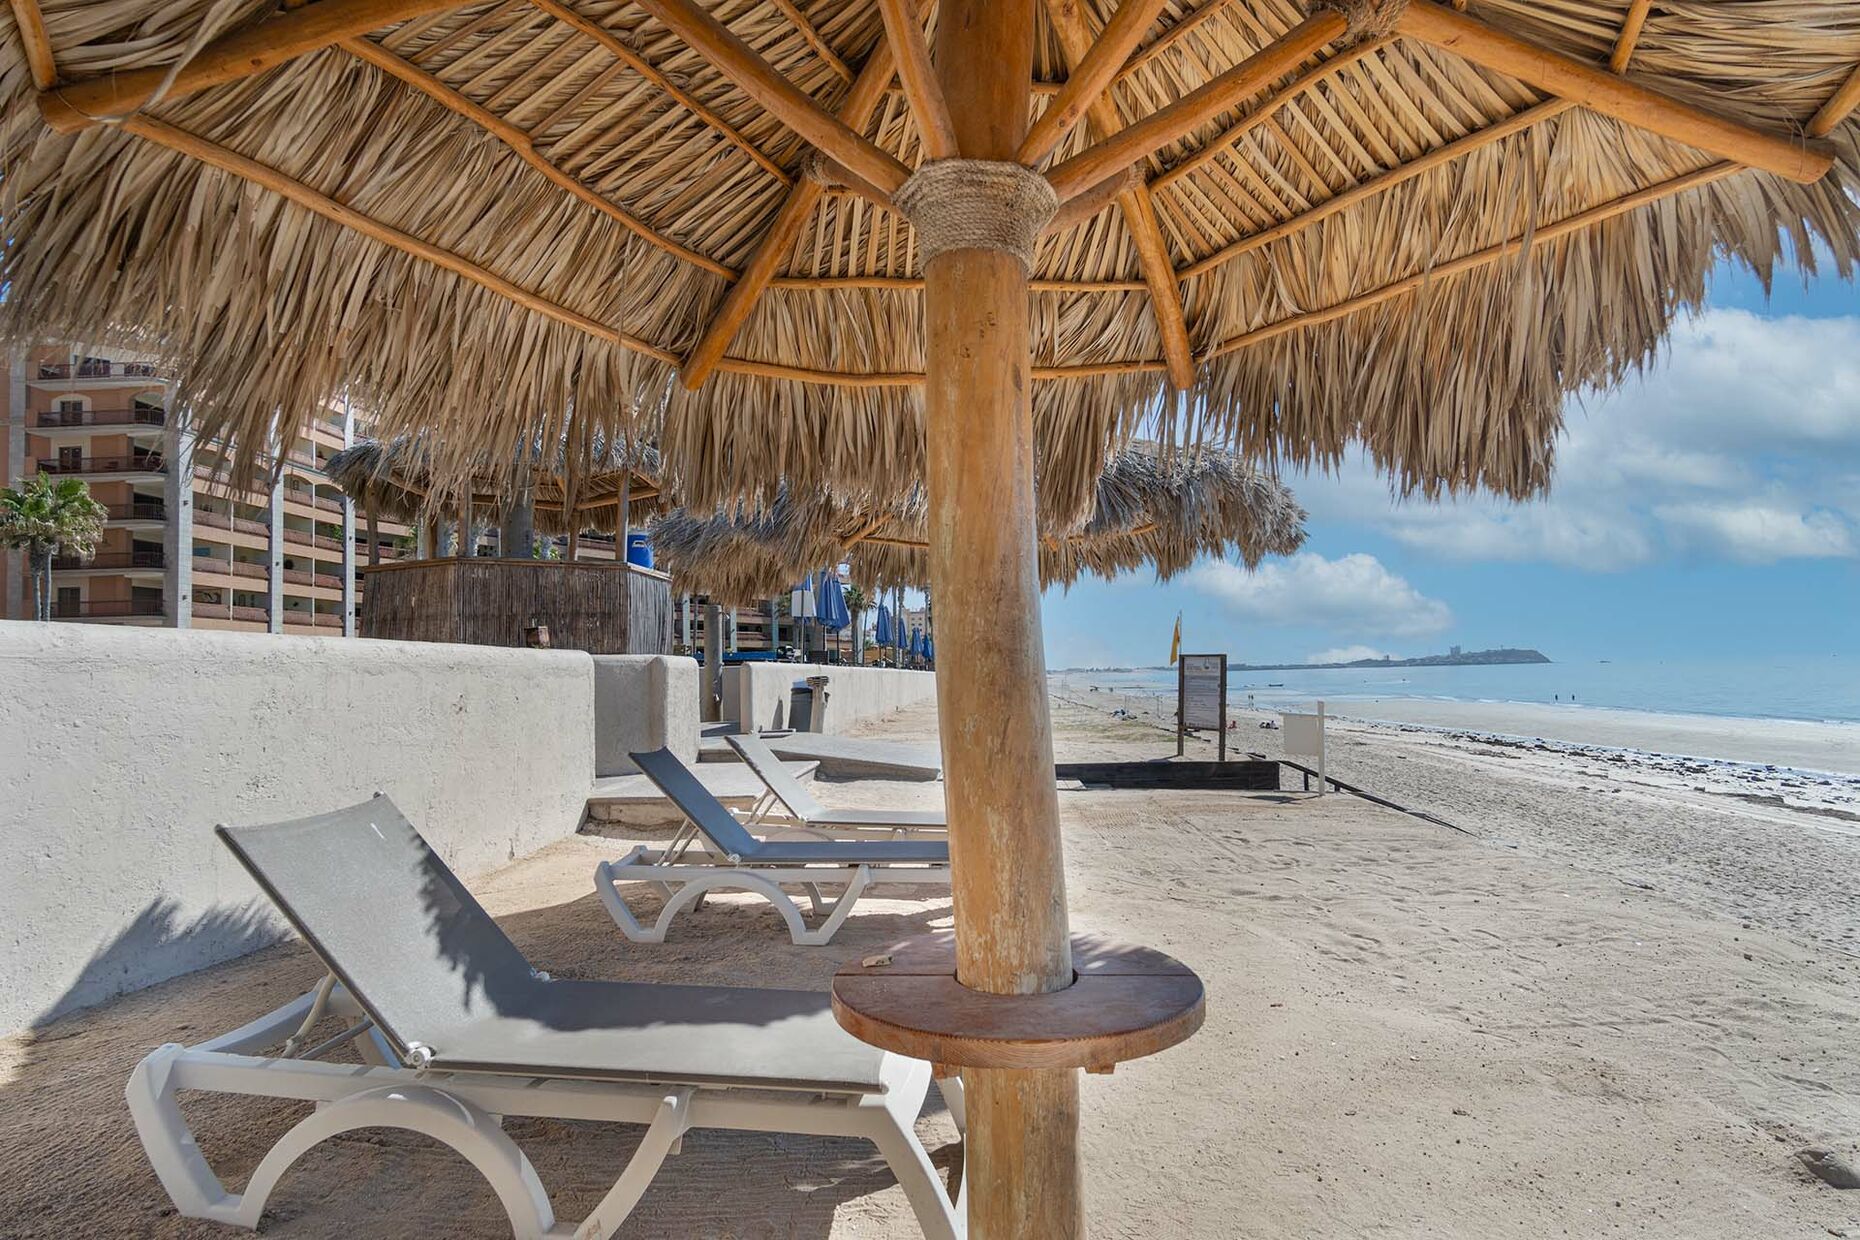 A shade palapa protects you for a day at the beach